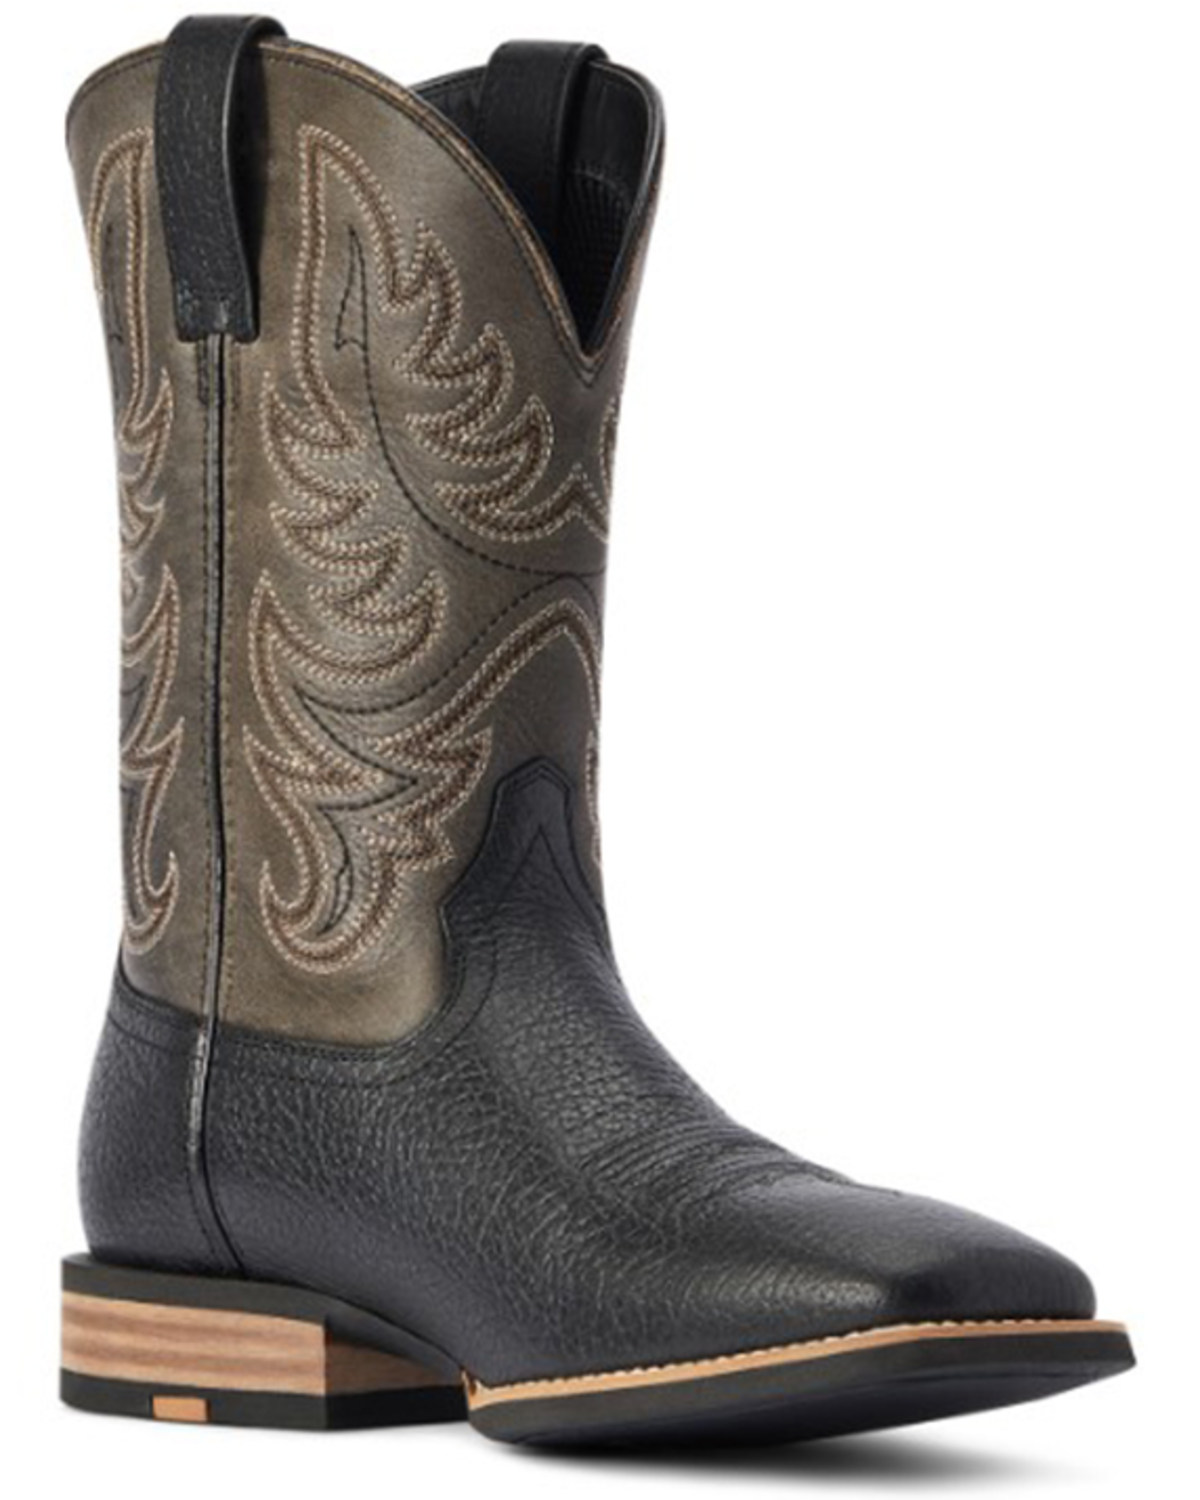 Ariat Men's Everlite Western Performance Boots - Broad Square Toe